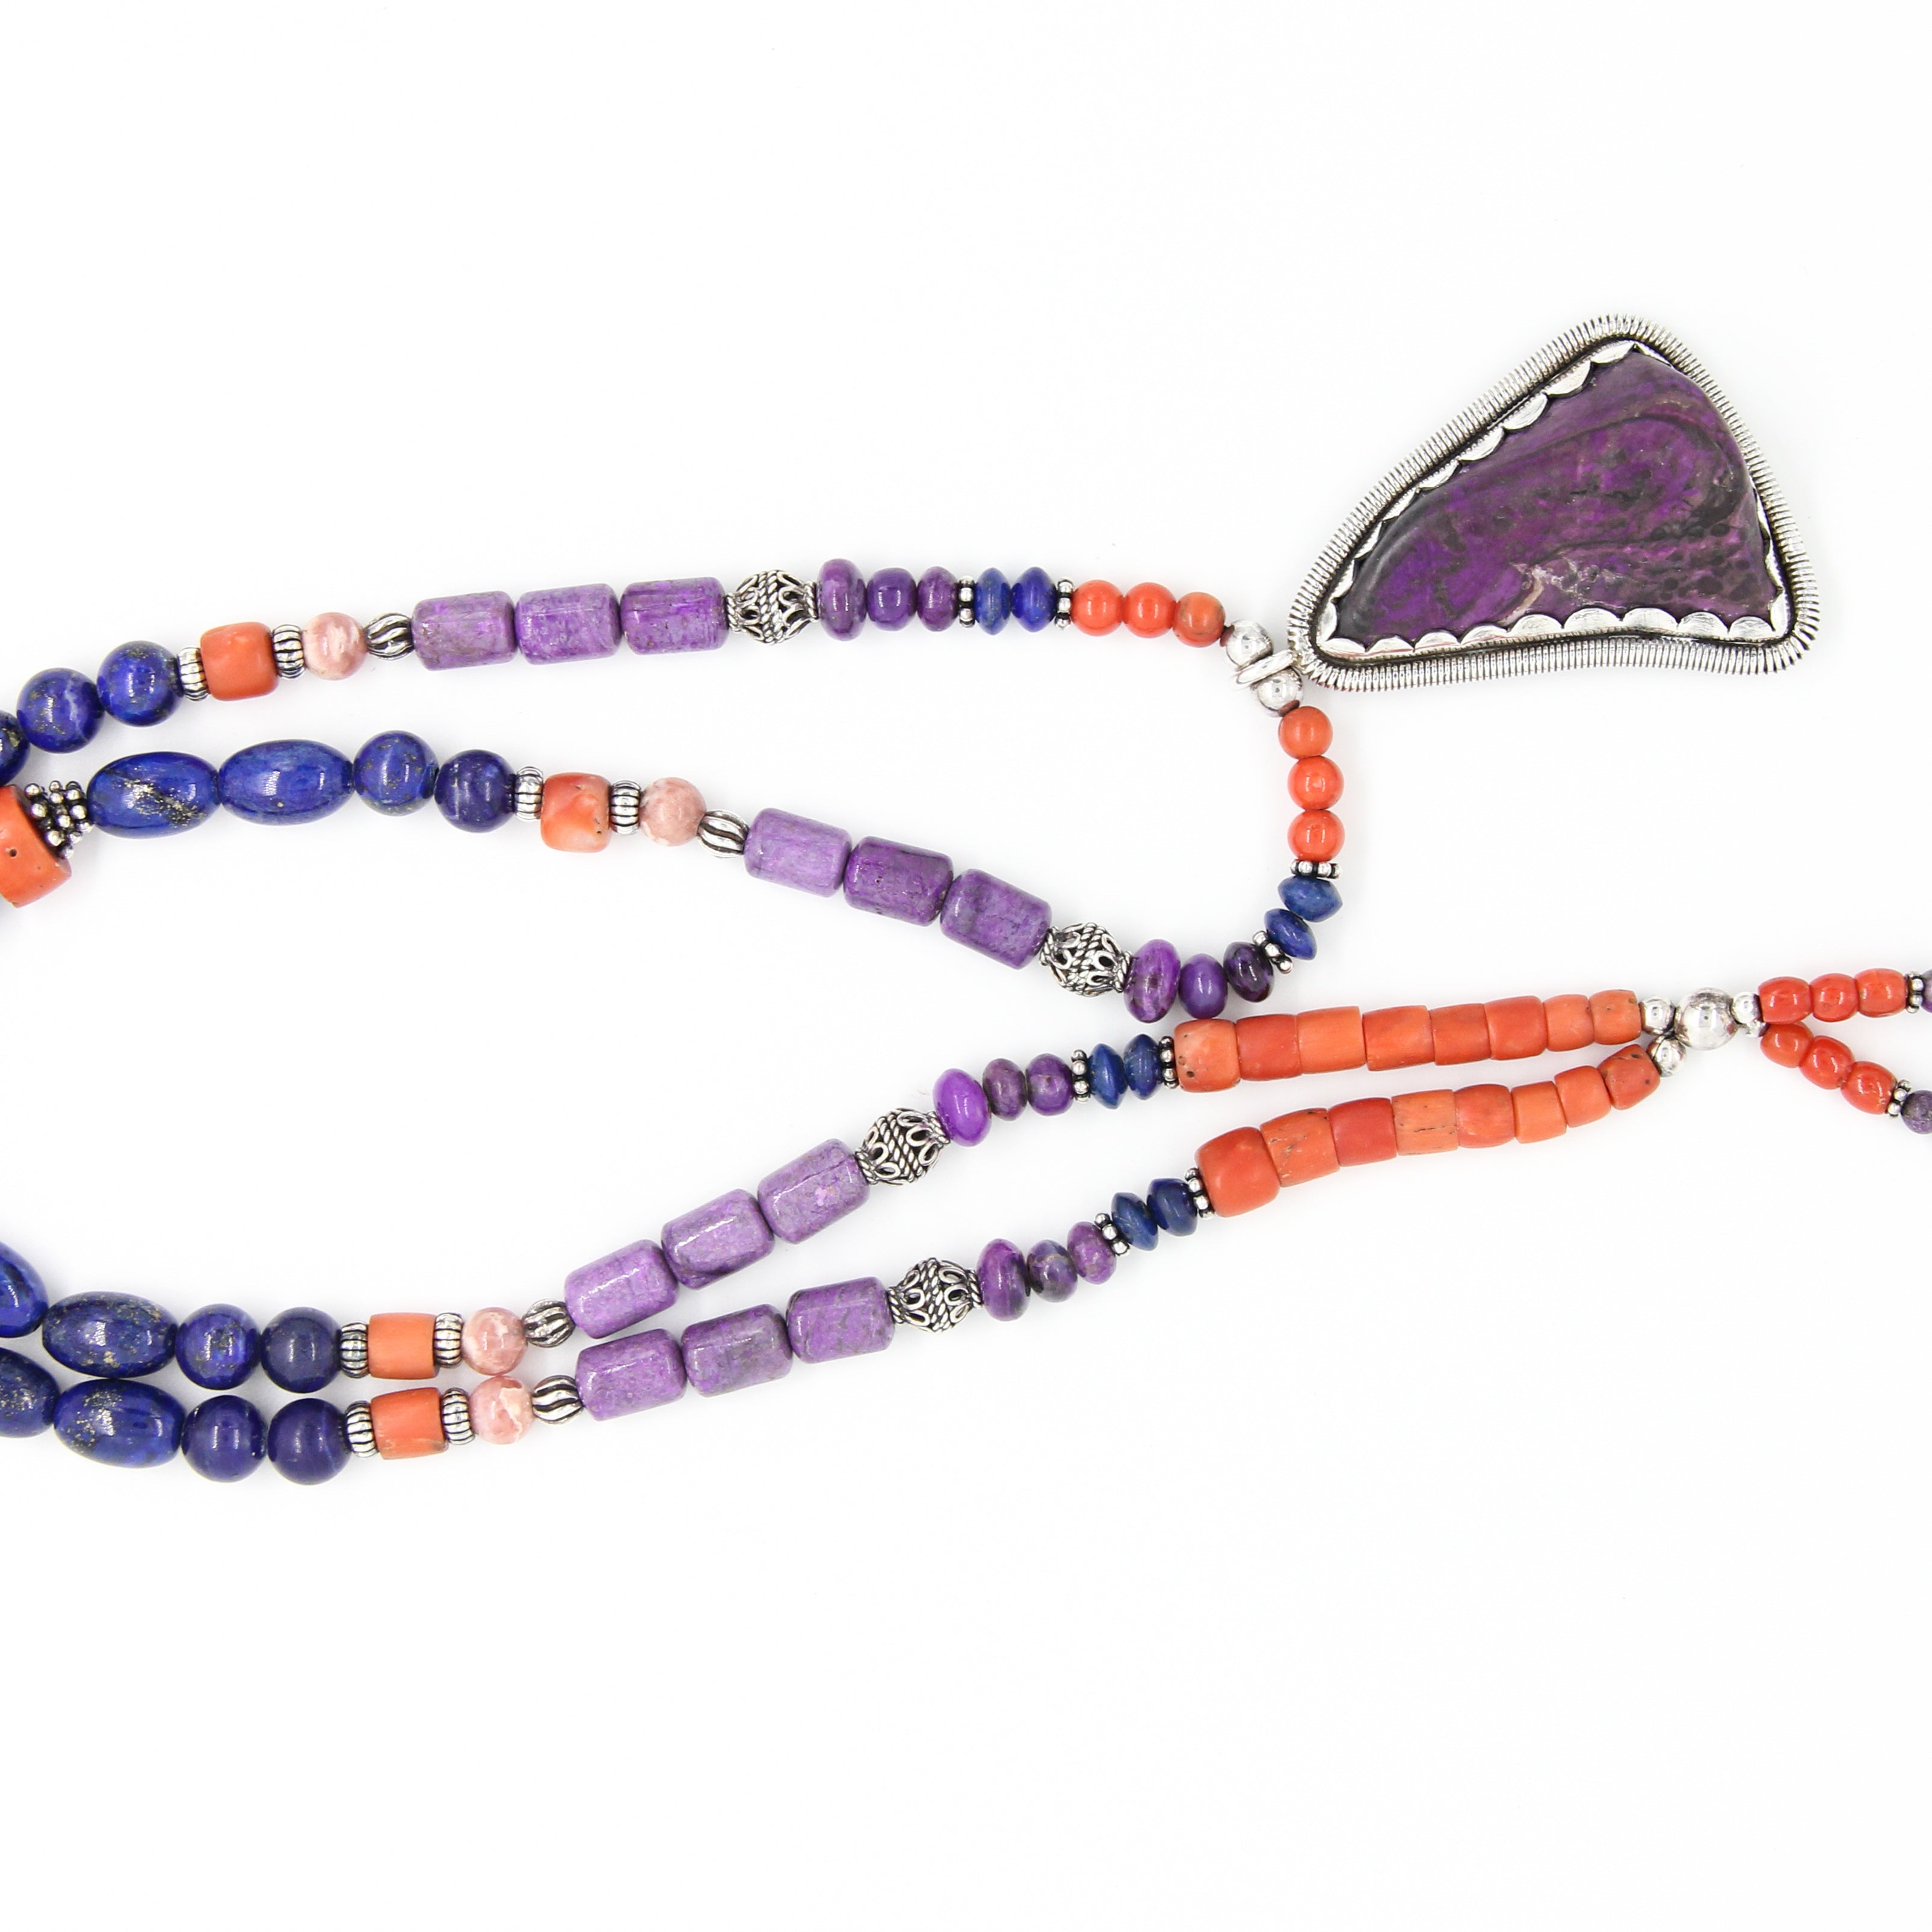 Sugilite Necklace with Red Coral, Lapis Lazuli, Rhodochrosite, Kyanite and Silver Beads